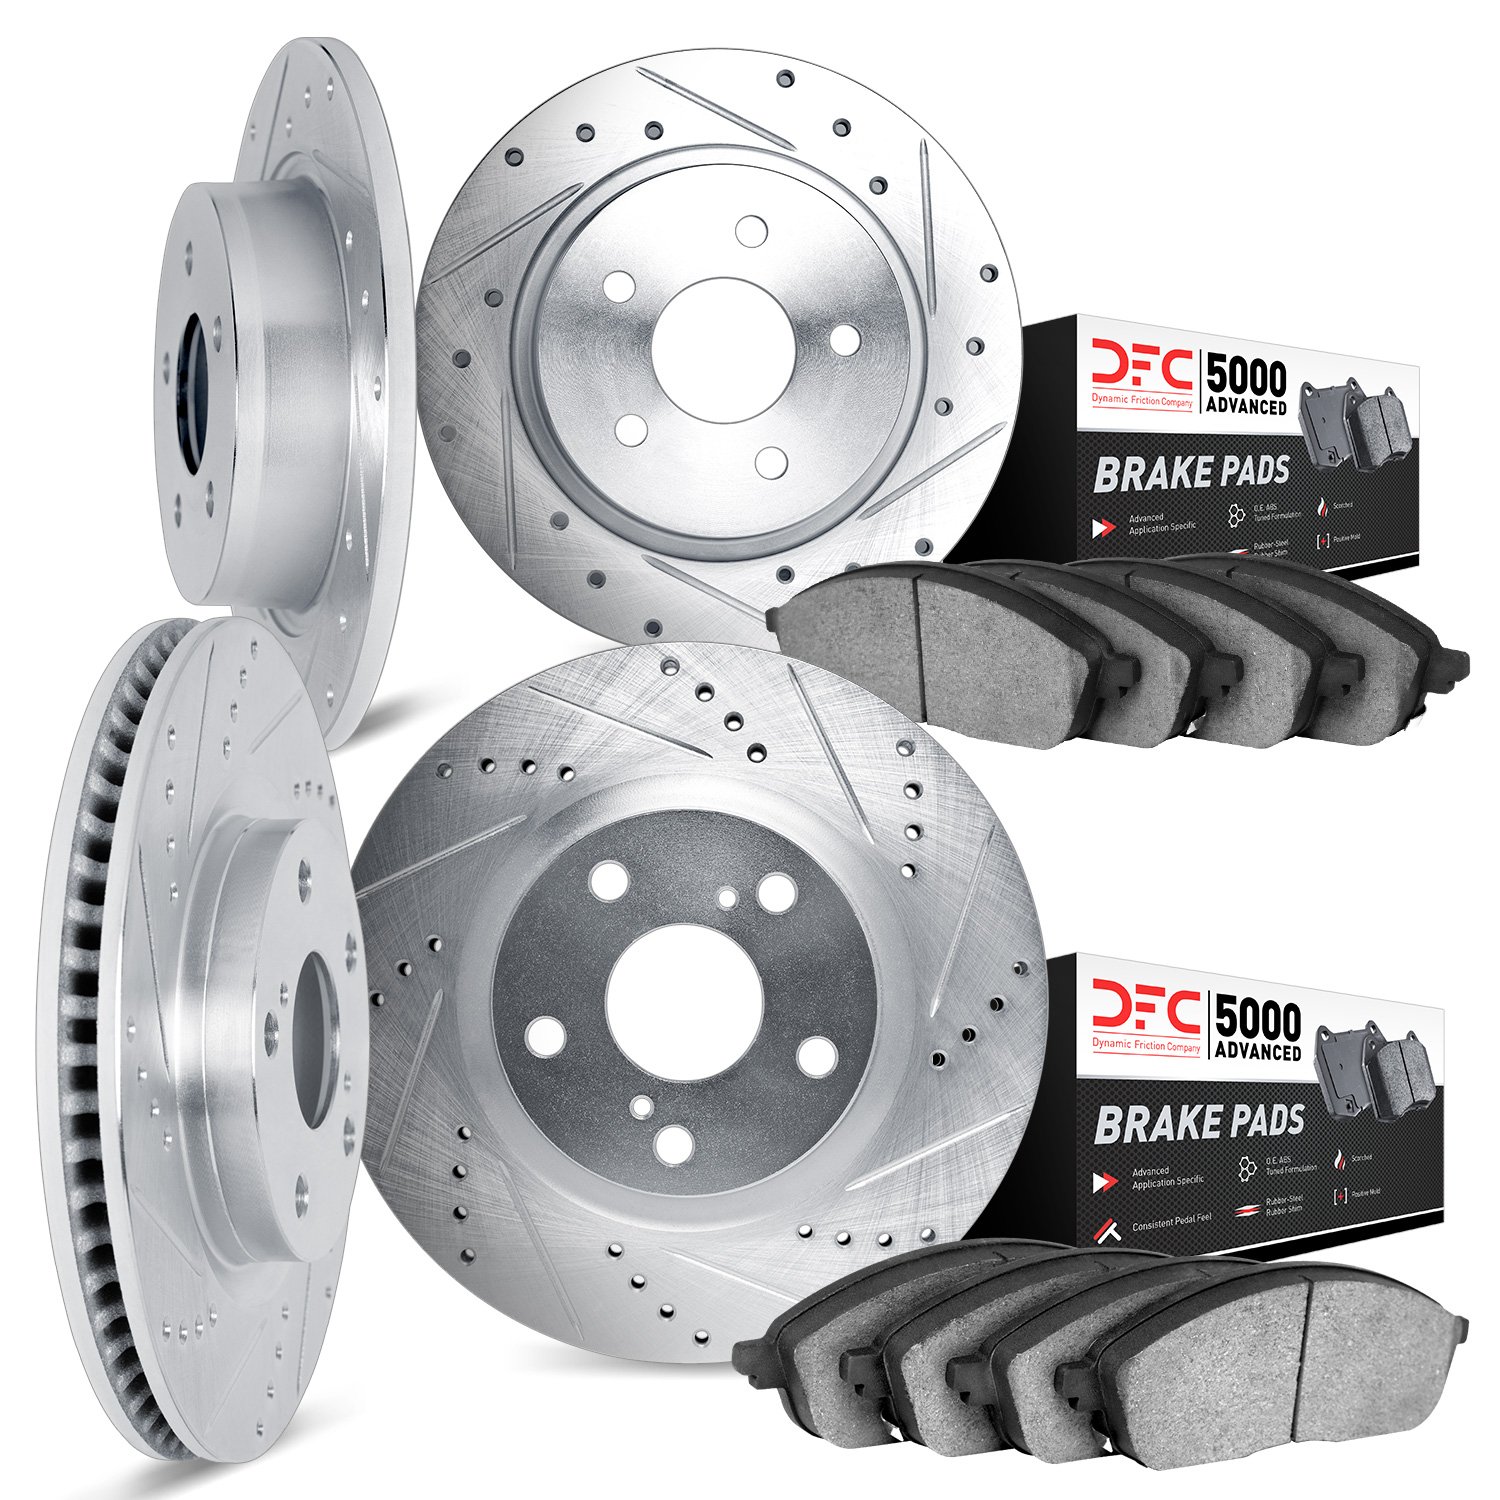 7504-76154 Drilled/Slotted Brake Rotors w/5000 Advanced Brake Pads Kit [Silver], 2004-2010 Lexus/Toyota/Scion, Position: Front a